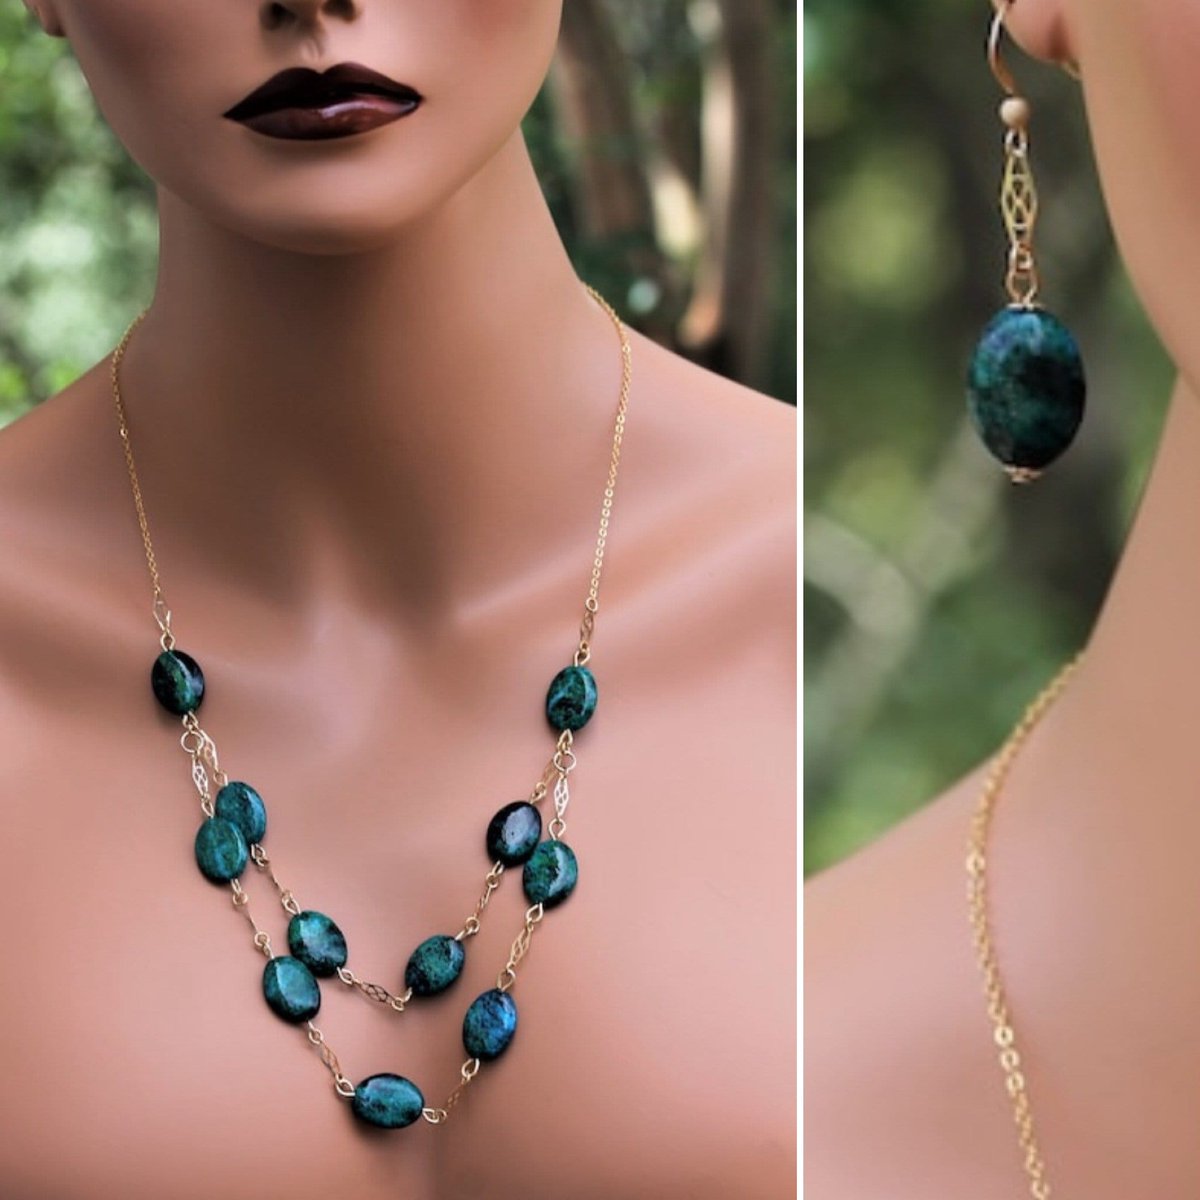 Sharing for Razie Blakley on Etsy

Really love this, from the Etsy shop ZebaCreations. etsy.me/43vC1MM #etsy #chrysocolla #greenjewelry #layerednecklaces #boldjewelry #yellowgold #jewelrysets #anniversarygift #workaccessory #mothersday